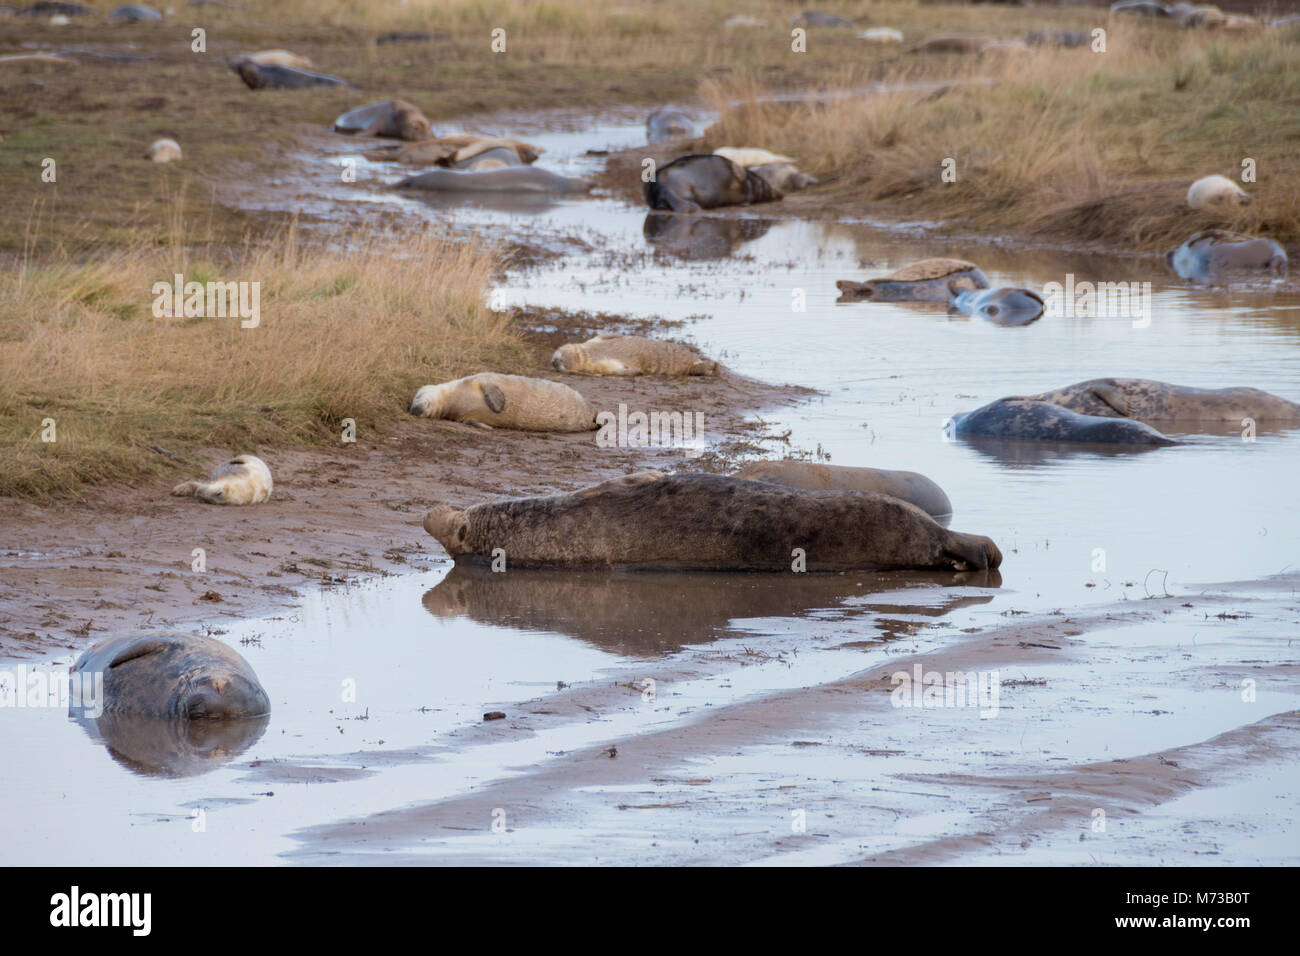 Donna Nook, Lincolnshire, UK – Nov 15: Grey seals come ashore in late Autumn for birthing season on 15 Nov 2016 at Donna Nook Seal Santuary, Lincolnsh Stock Photo